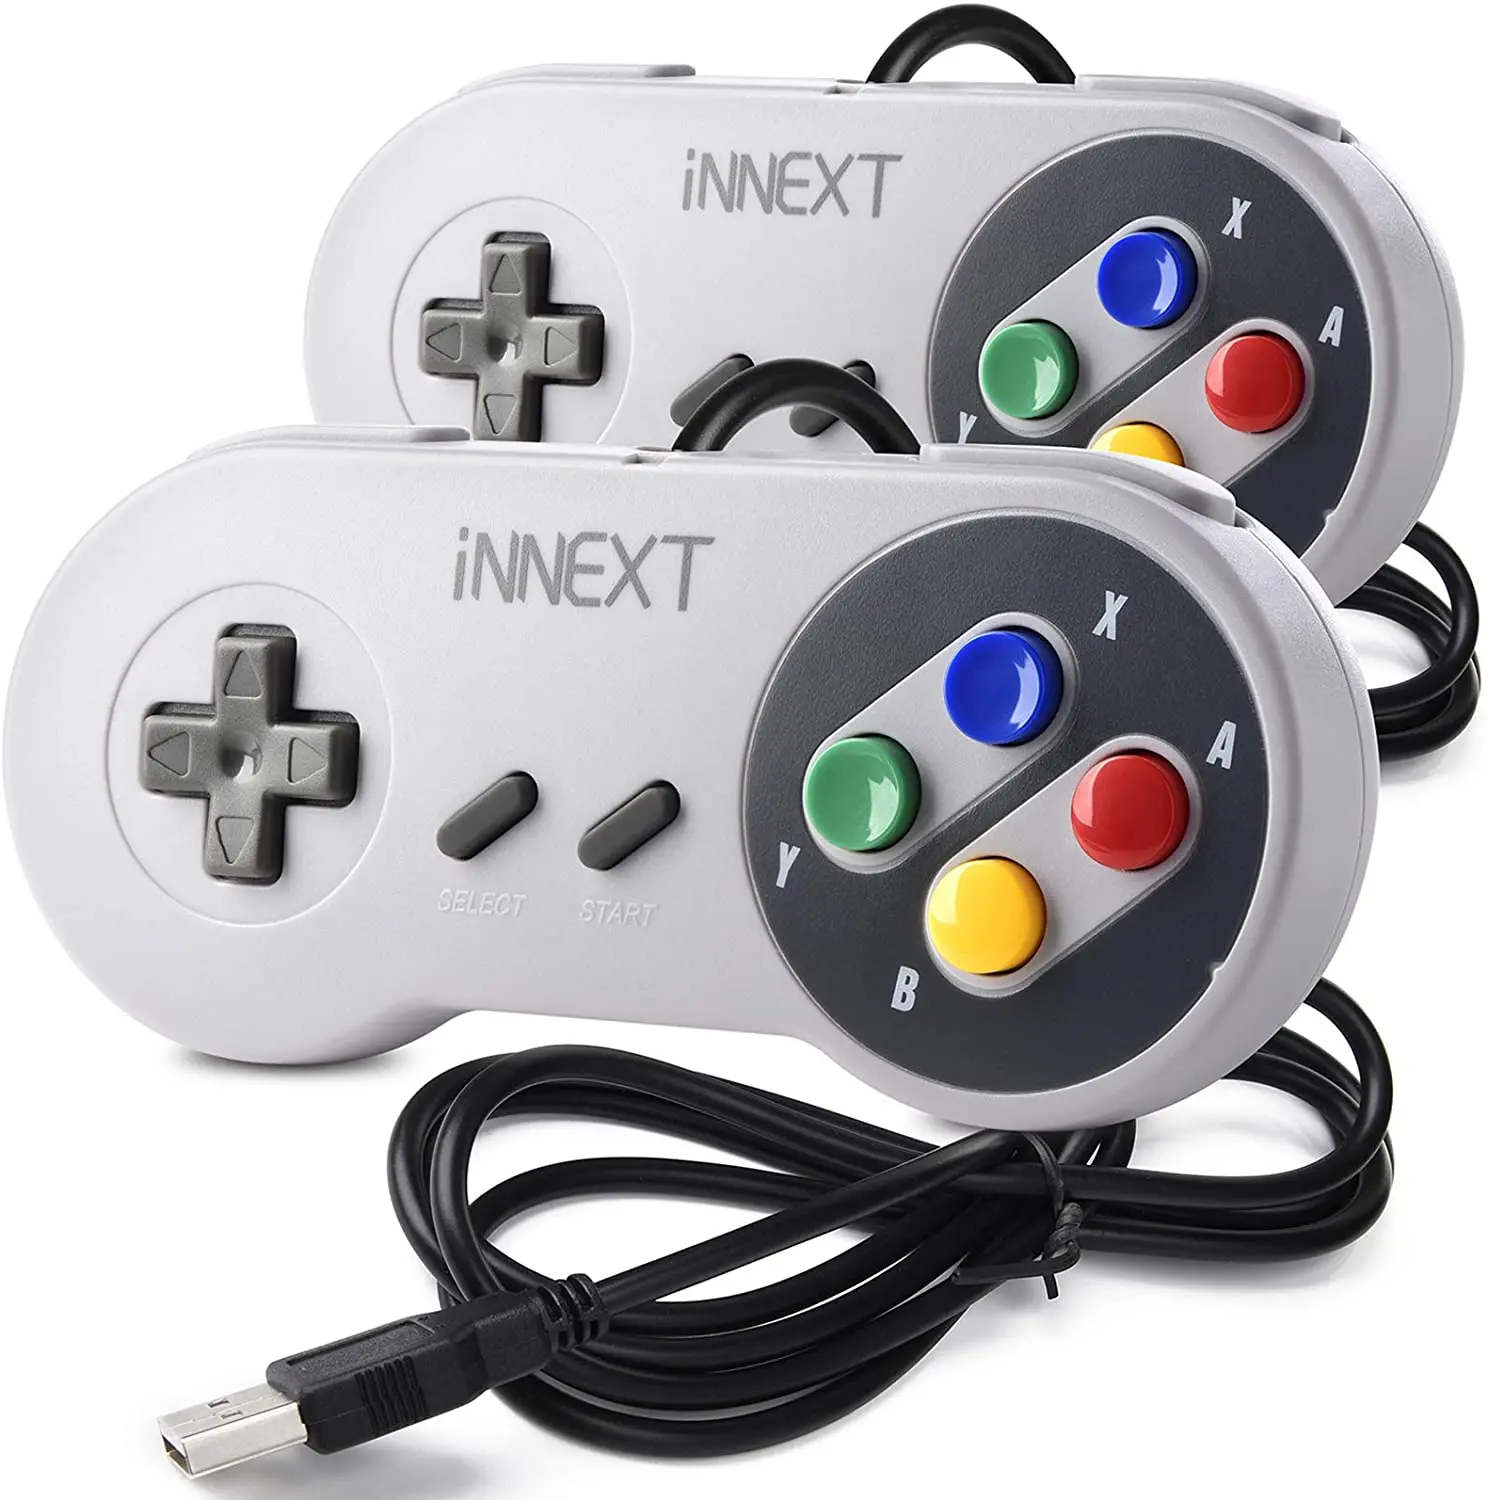 

USB Classic Game Controller Joypad Wired Joystick Gamepad for SNES Retro Gaming for Windows 7/8/10 PC MAC Linux Raspberry Pi 3